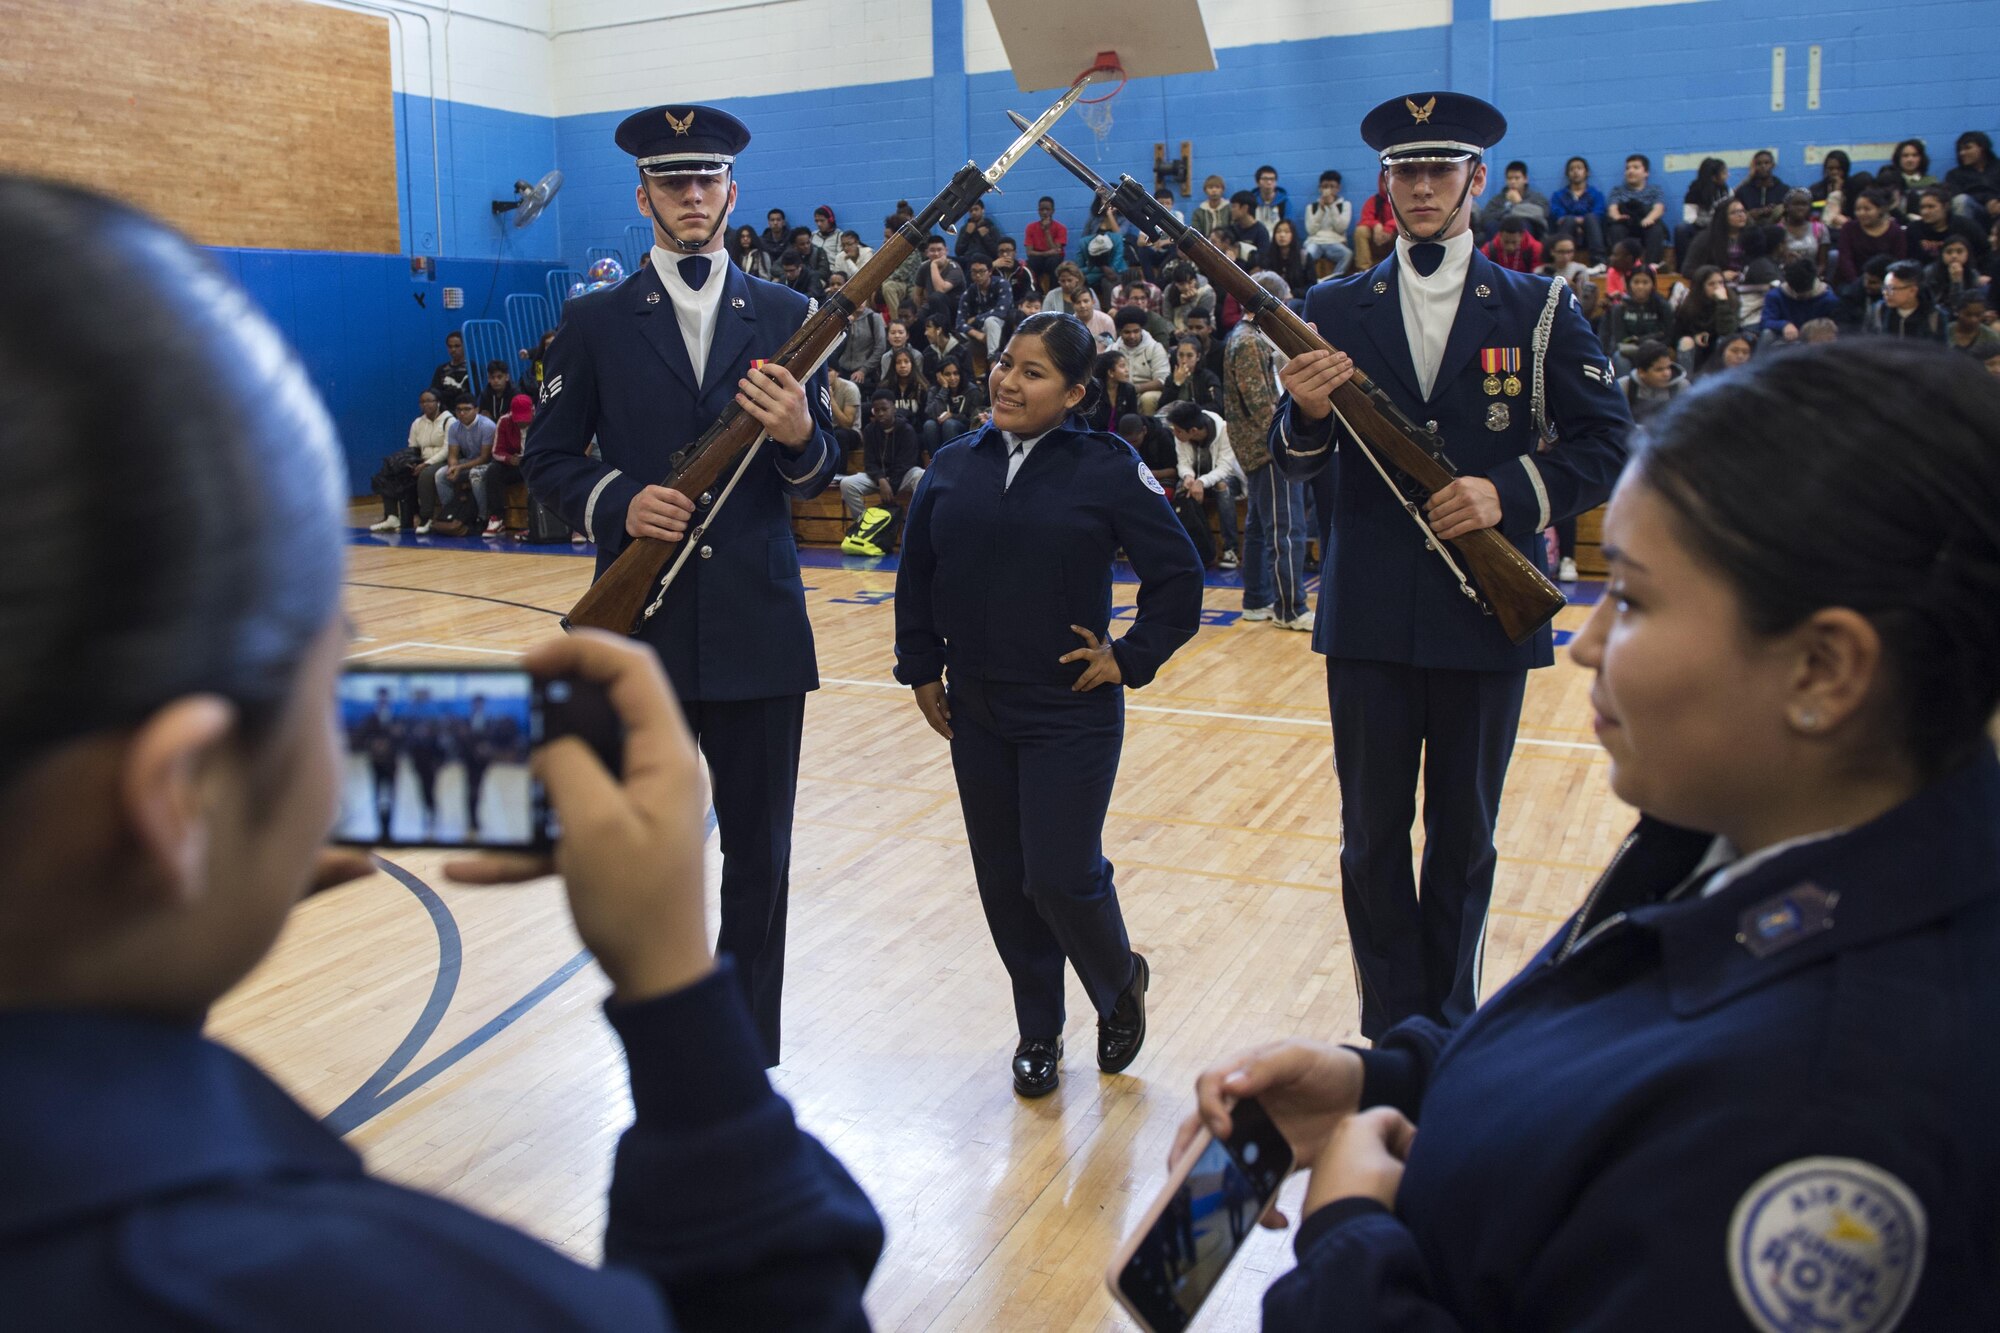 Air Force Junior ROTC students from Bowne High School take photos with U.S. Air Force Honor Guard Drill Team members students during a school visit in New York, Nov. 10, 2016. The drill team had the chance to take photos, answer questions and interact with some of the high school’s junior ROTC students. (U.S. Air Force photo by Senior Airman Philip Bryant)